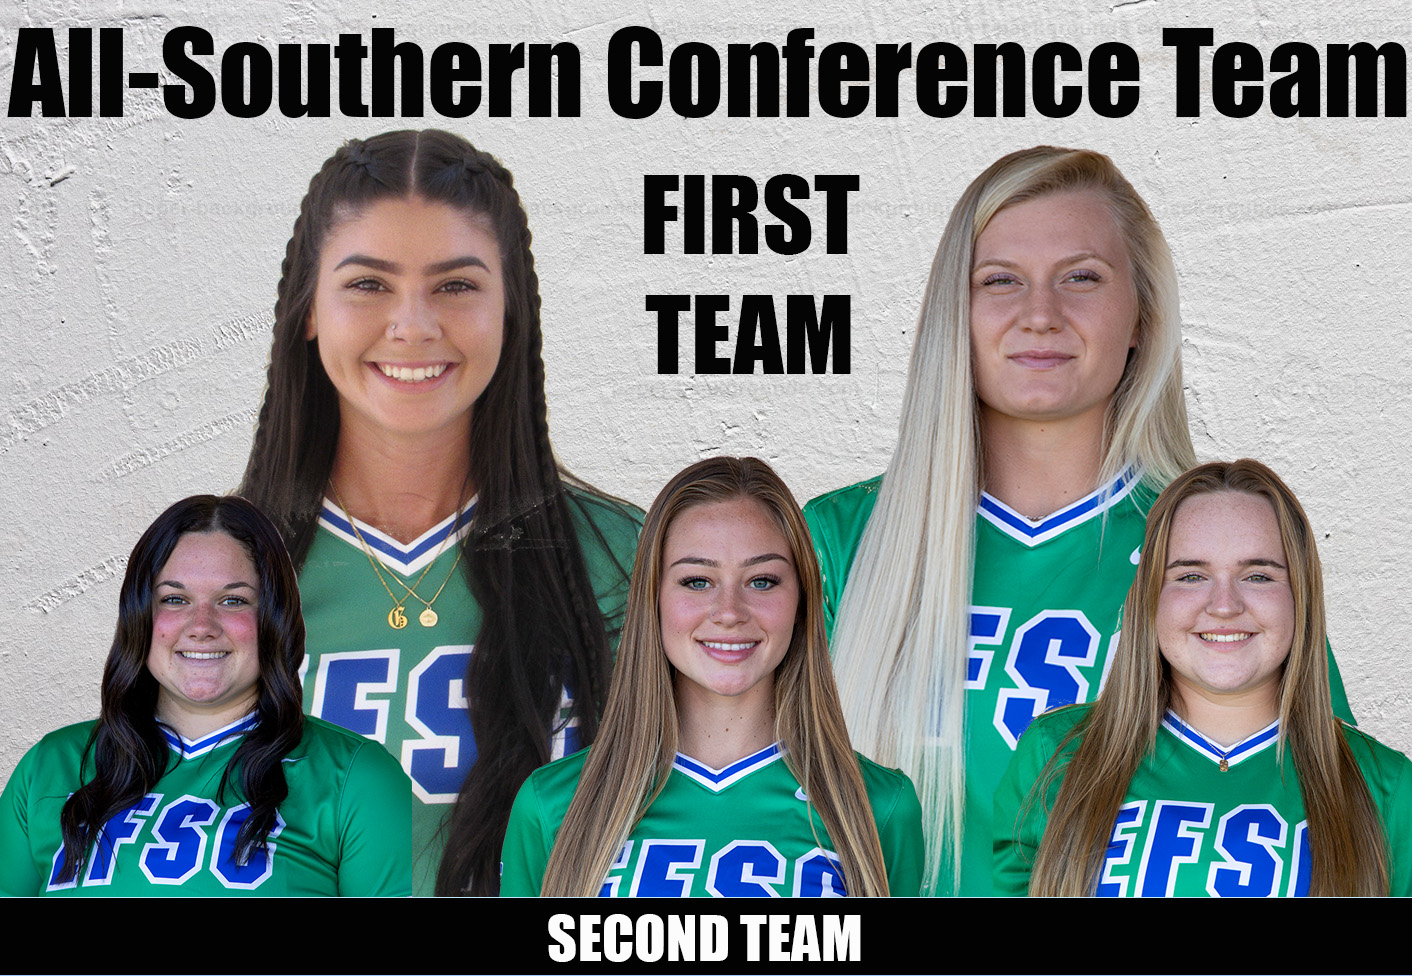 Five softball players named to All-Southern Conference team